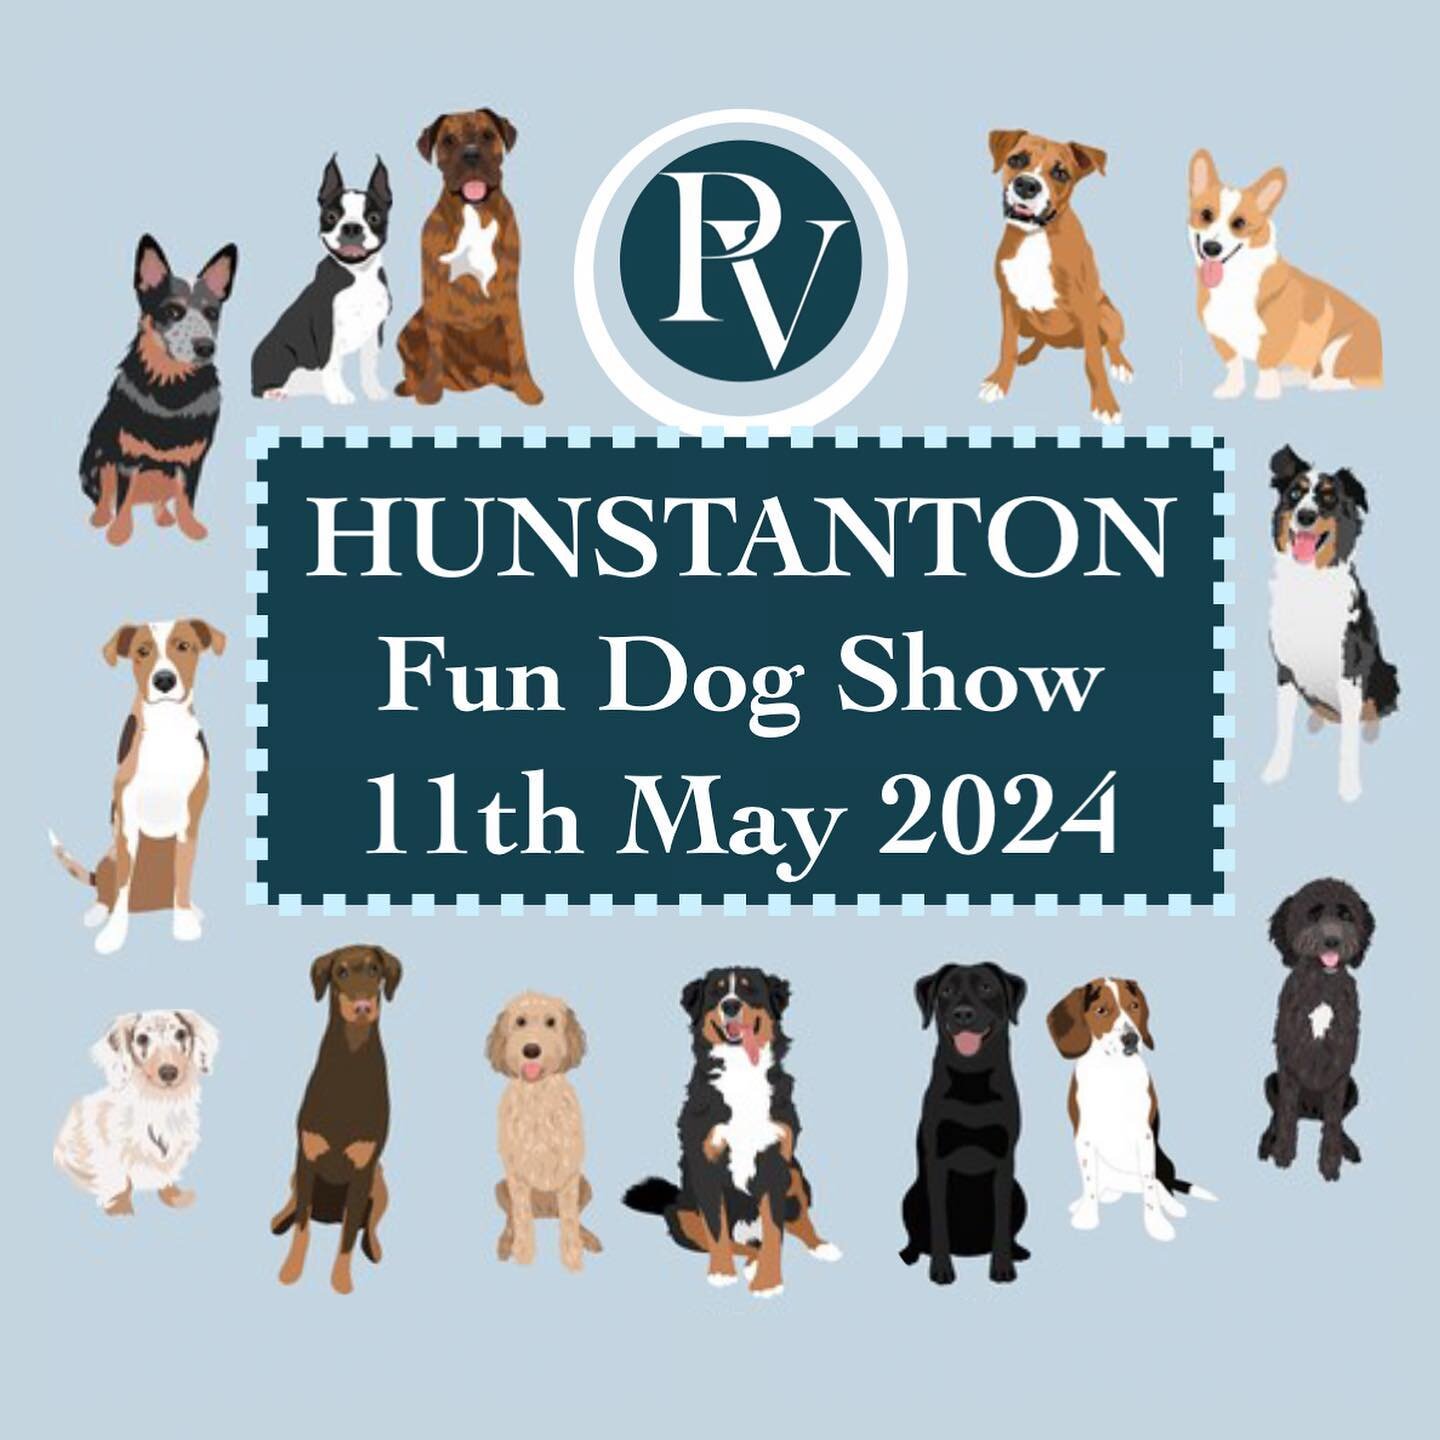 HUNSTANTON FUN DOG SHOW 

I am very excited to have a stall at this years Hunstanton Fun Dog show to promote my business and chat about all things physio! 

If you are attending come and say hello, grab some treats and tag us in your social media pos